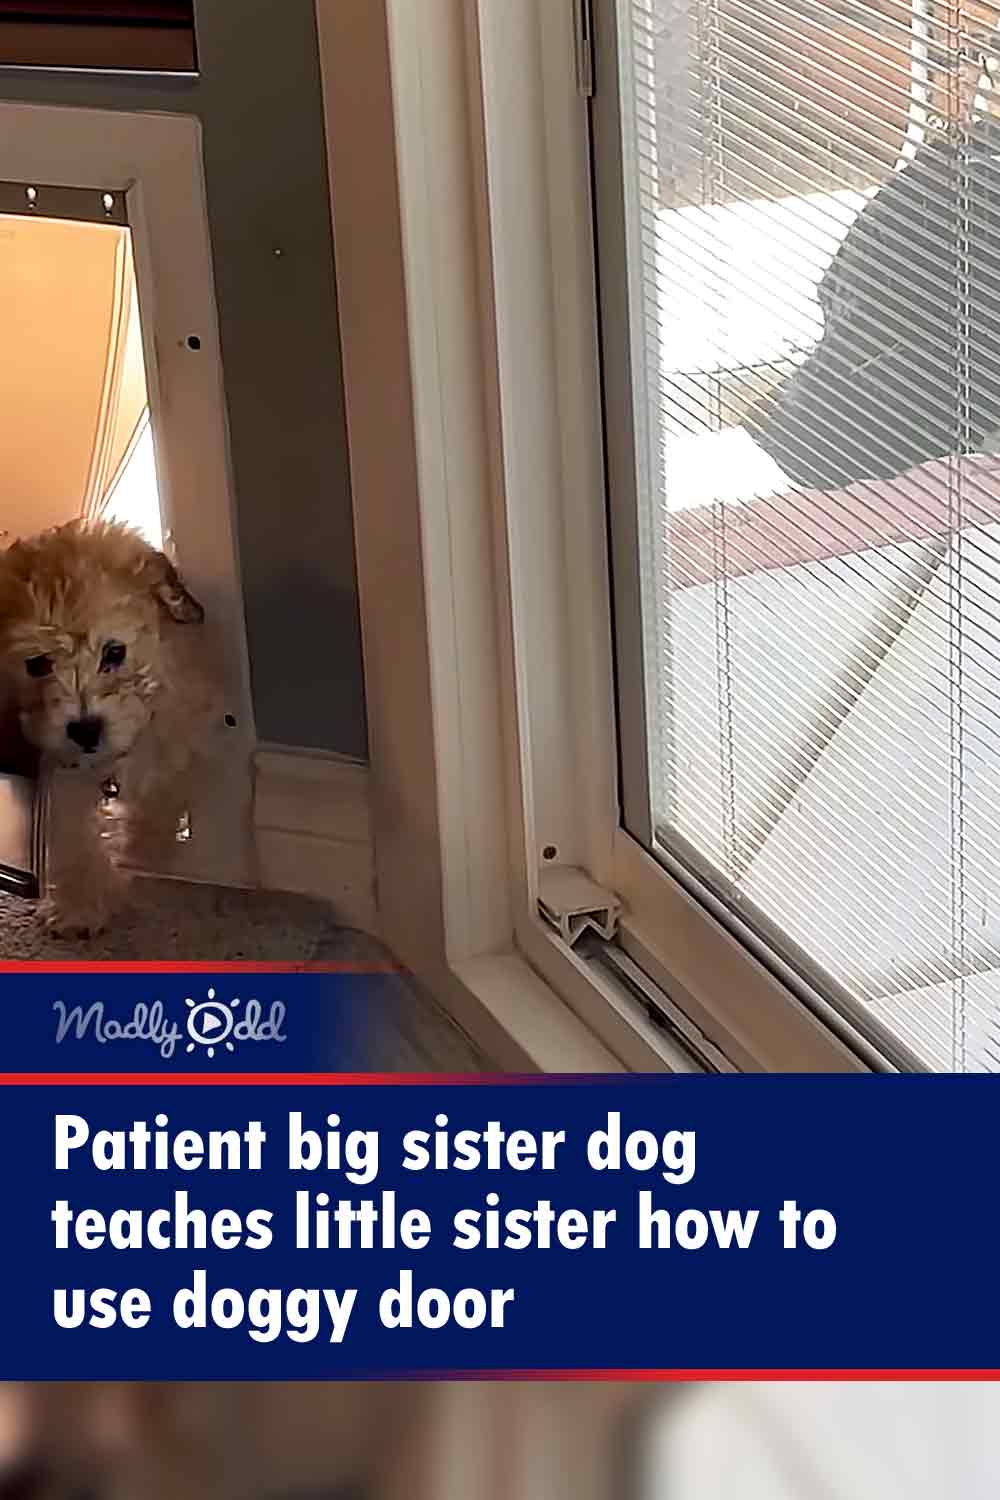 Patient big sister dog teaches little sister how to use doggy door